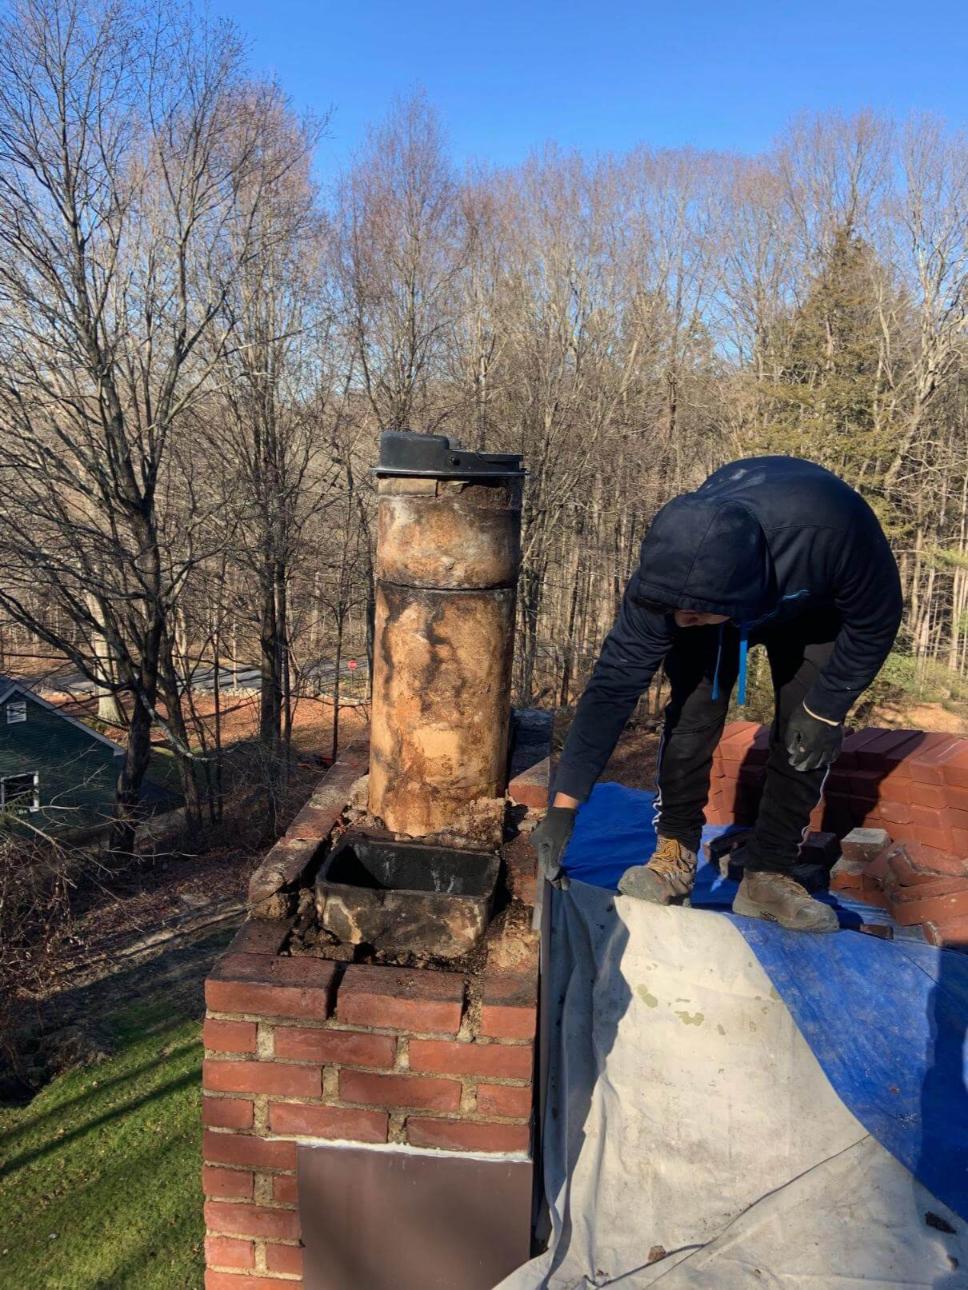 A man repairing a chimney on a roof.